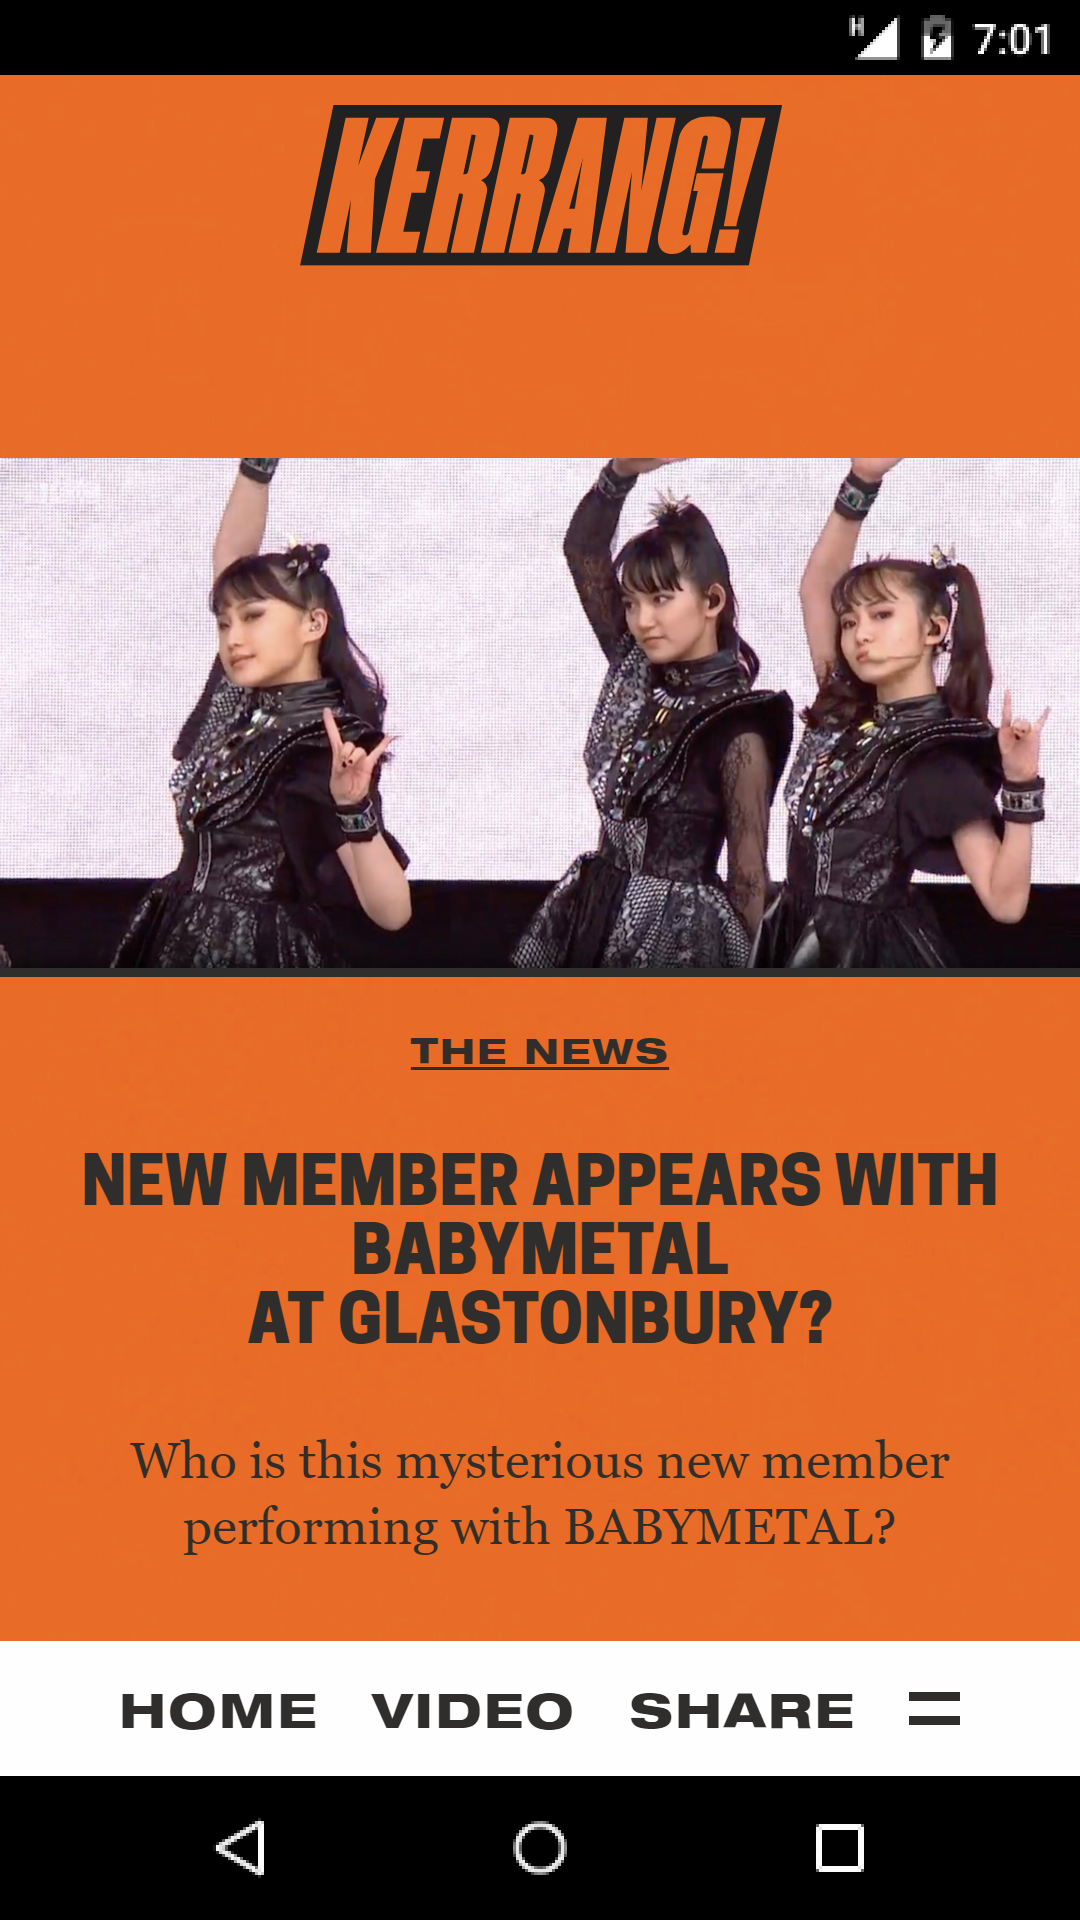 http://www.mybitchisajunky.com/whg/picture/www.kerrang.com_the-news_new-babymetal-member-appears-with-band-at-glastonbury.png